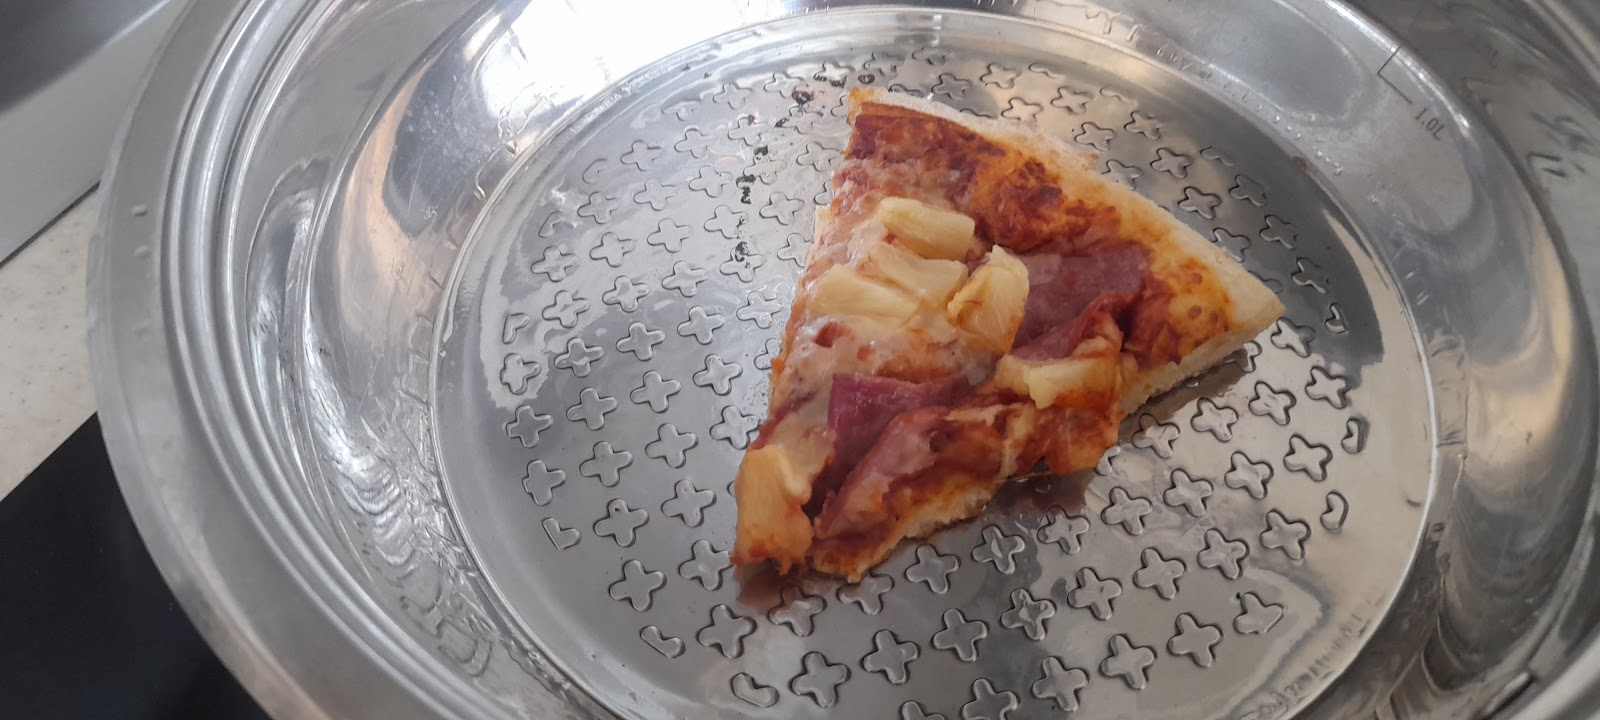 Hawaiian pizza reheated in a pan with a bit of oil.